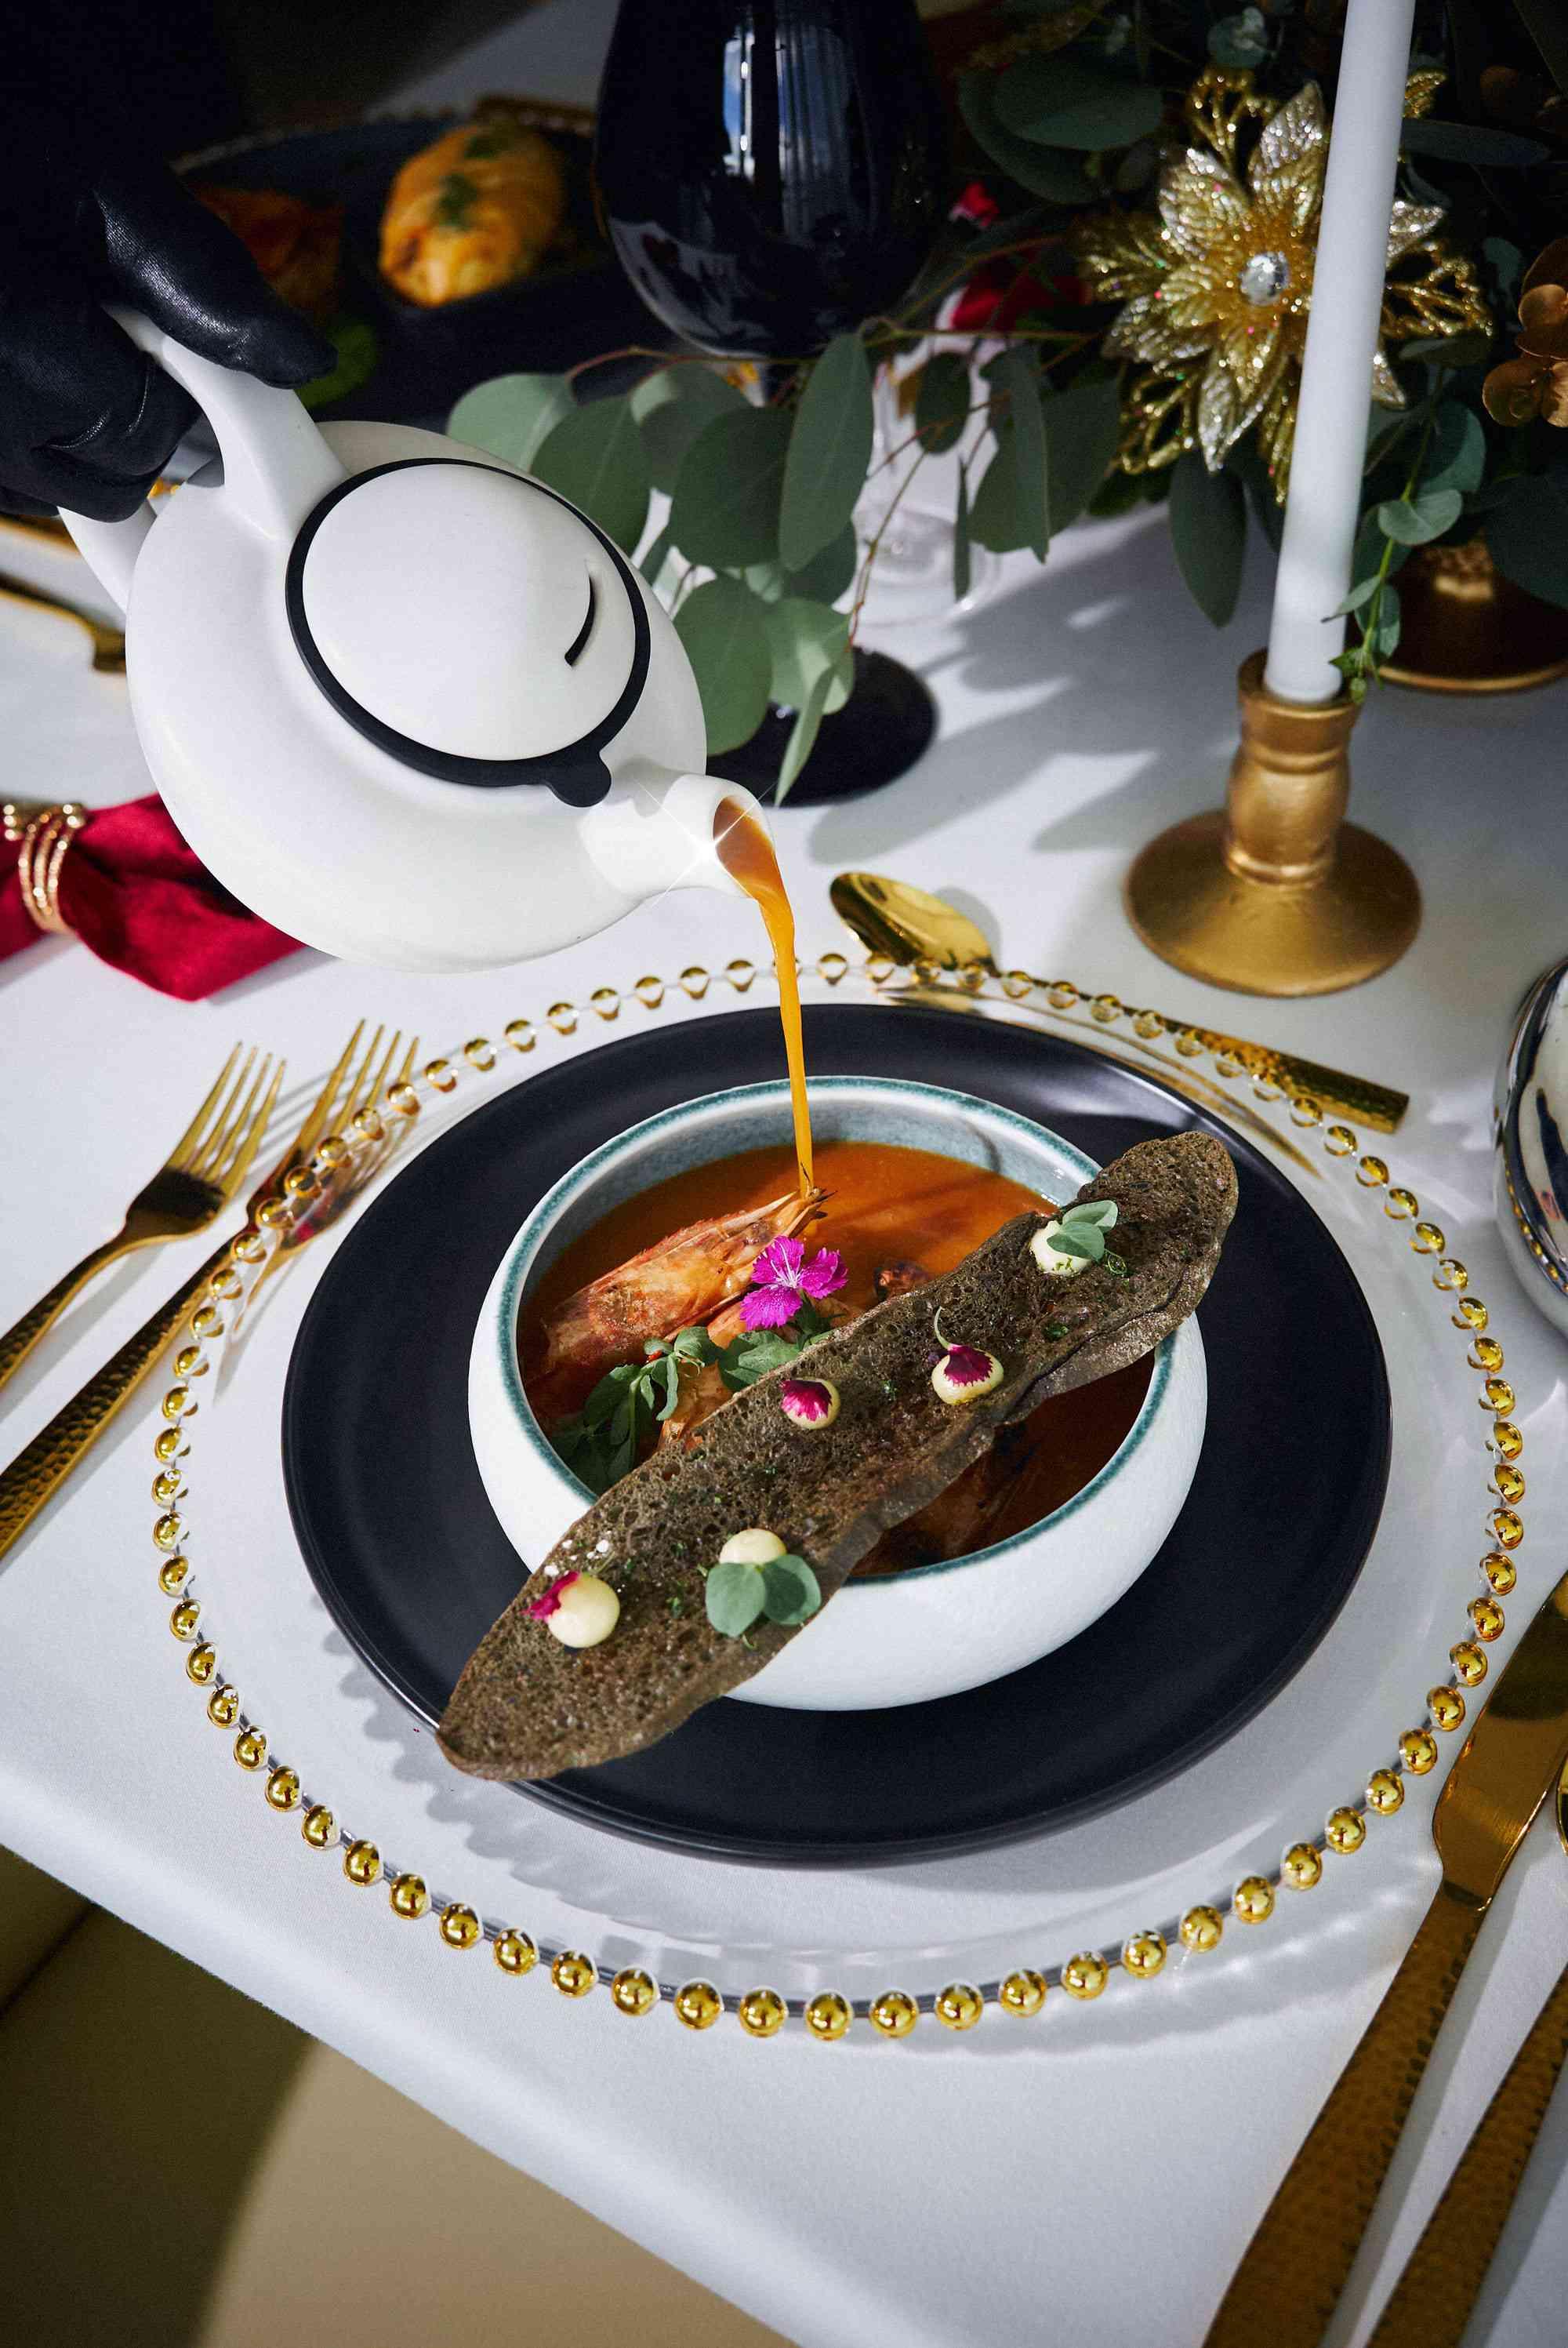 Festive table scape with someone pouring soup into a bowl